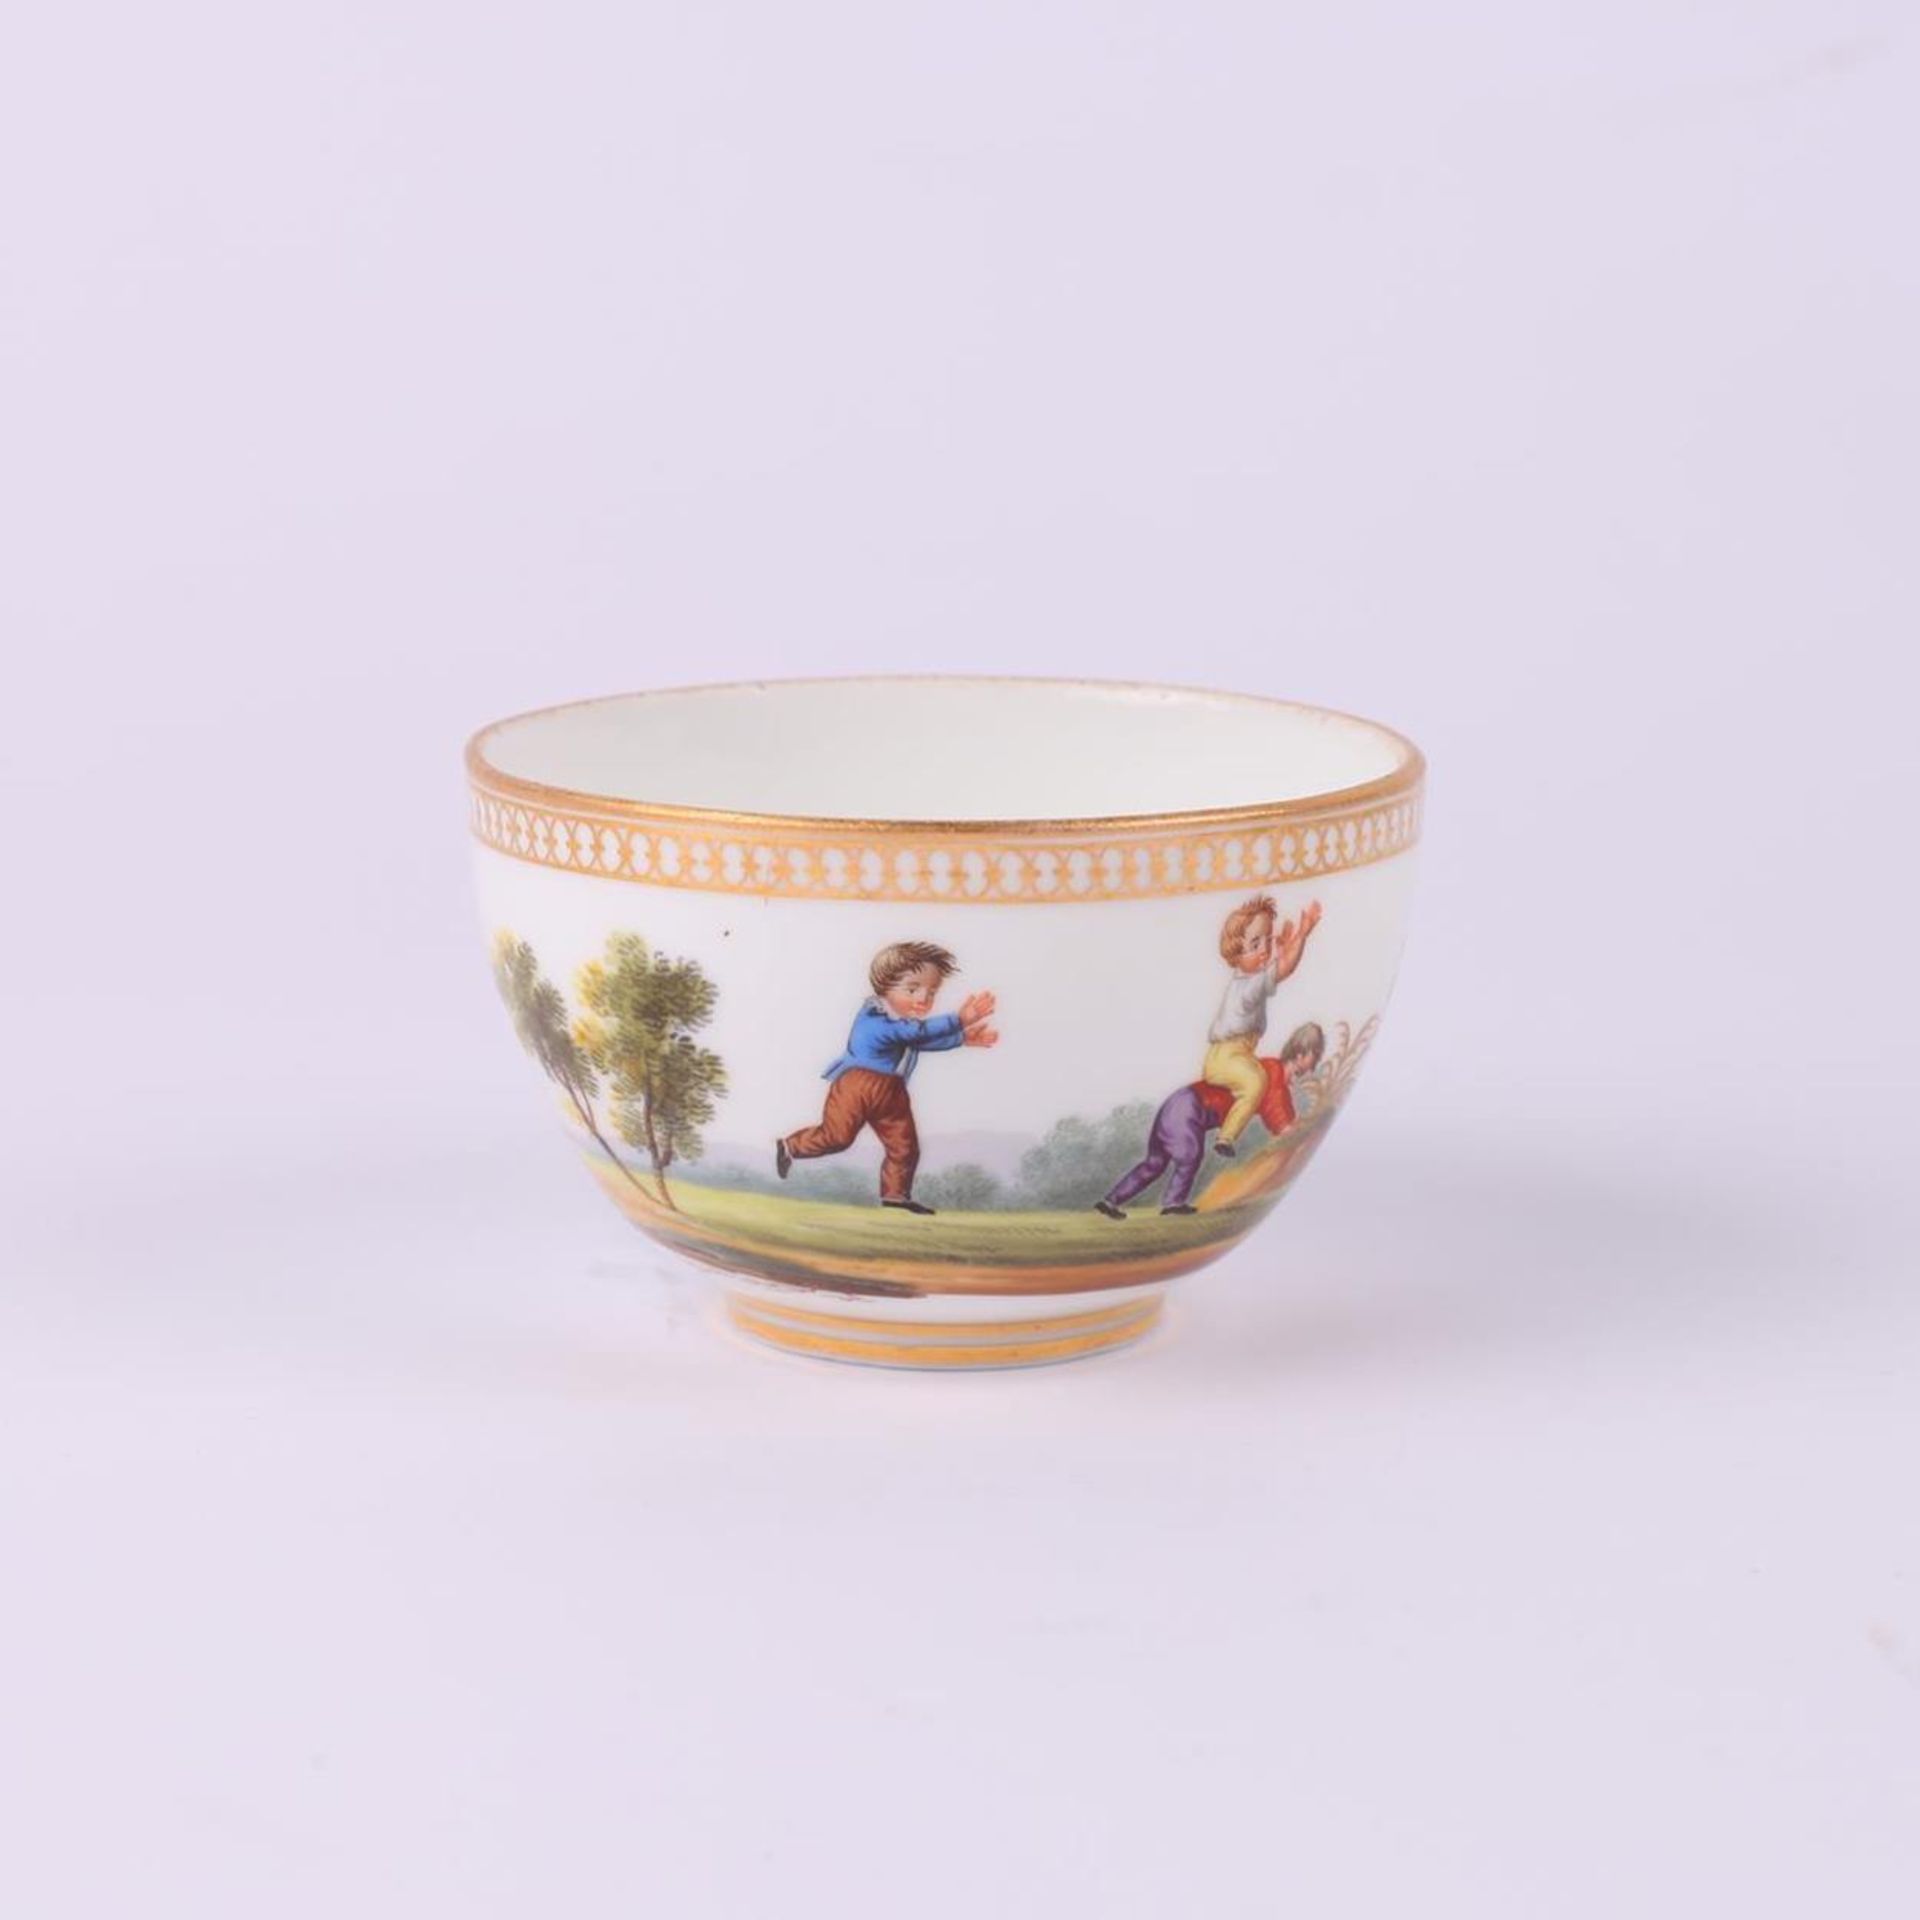 Two tea cup and saucer sets "A child's play". Popov. Moscow. 1850s. Porcelain, gilding, painting. - Bild 2 aus 8